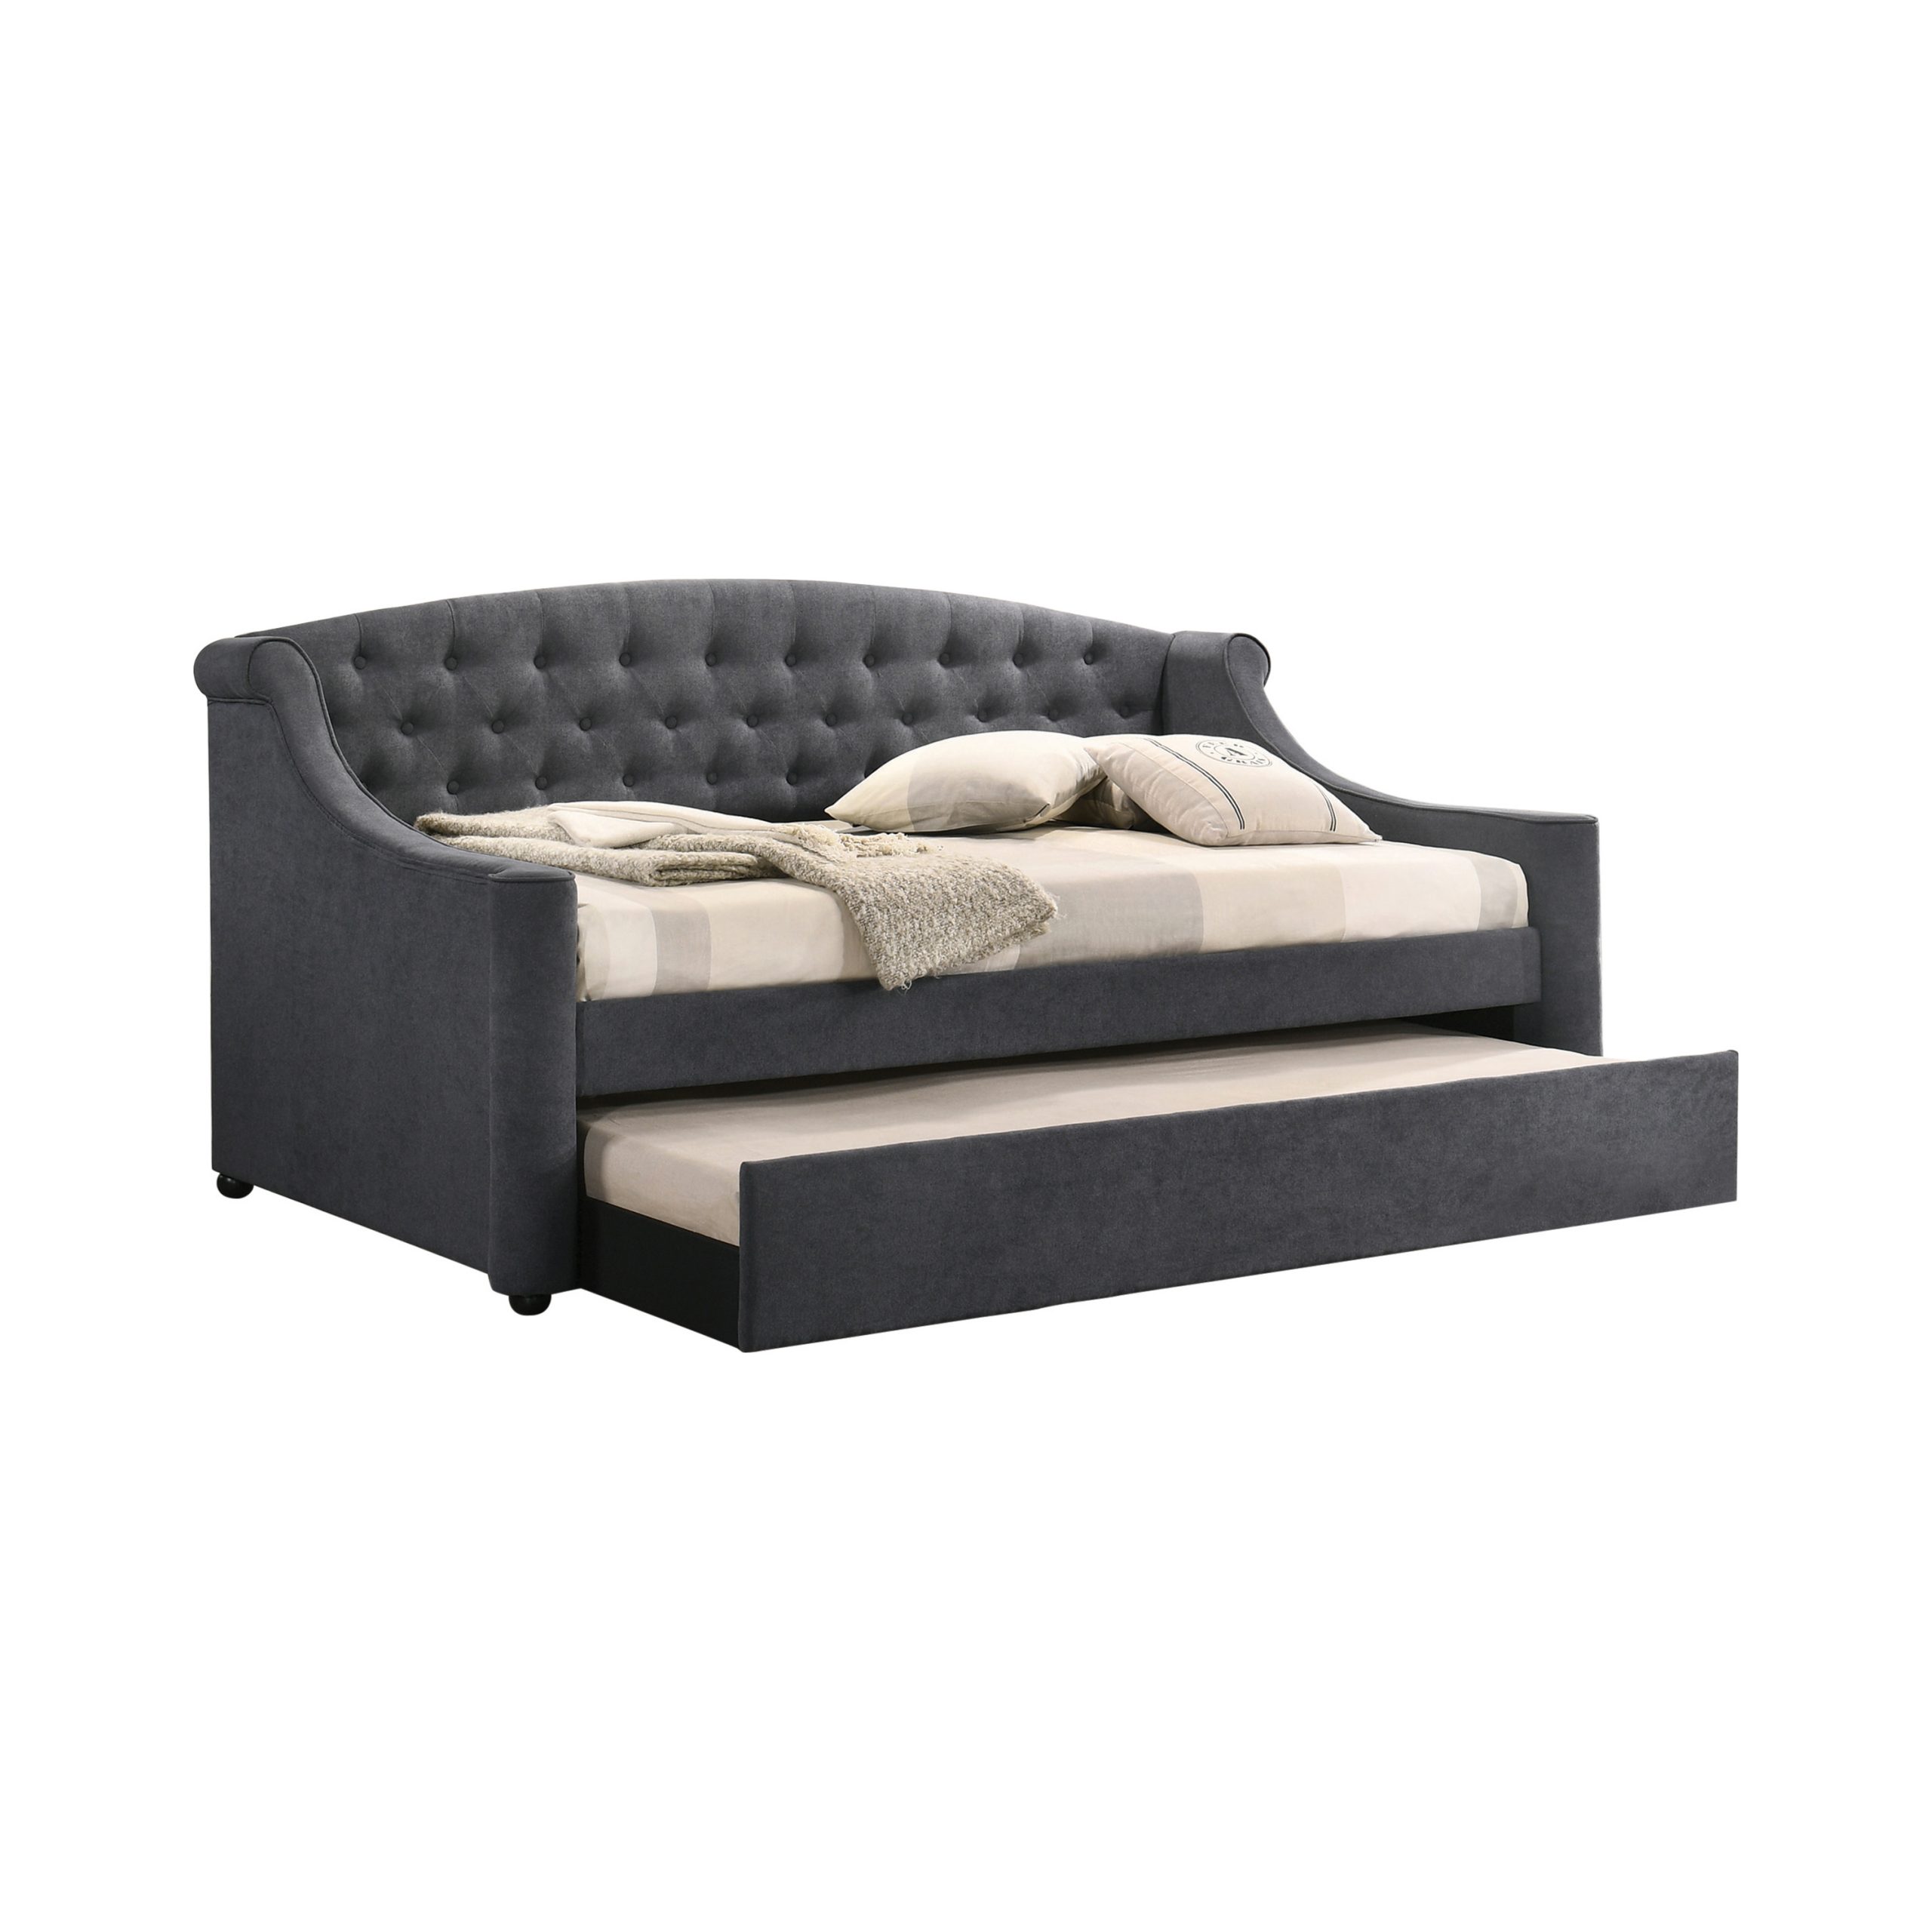 GREY - UPH TWIN DAYBED - NorCalFurniture